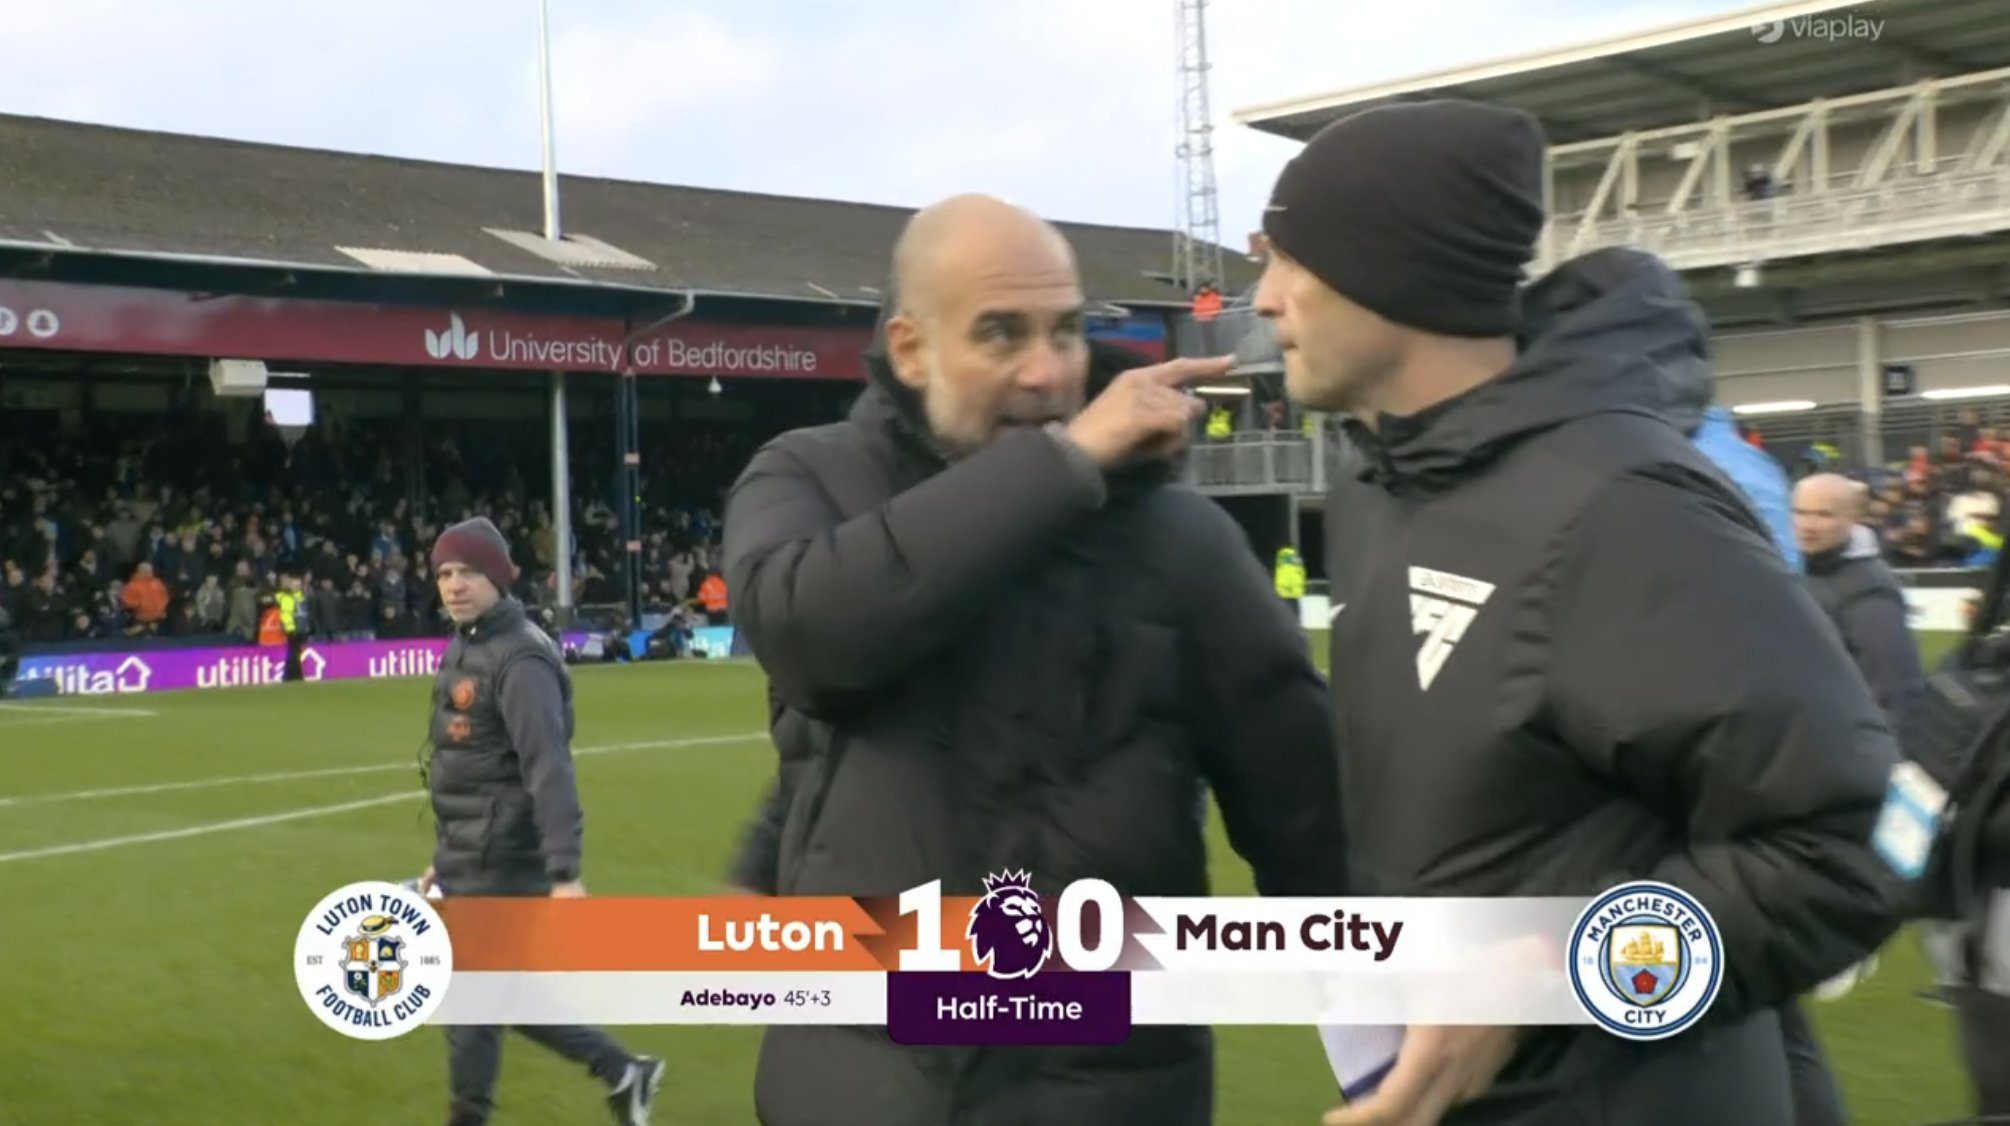 Video: A furious Pep Guardiola could be seen berating the official at half-time